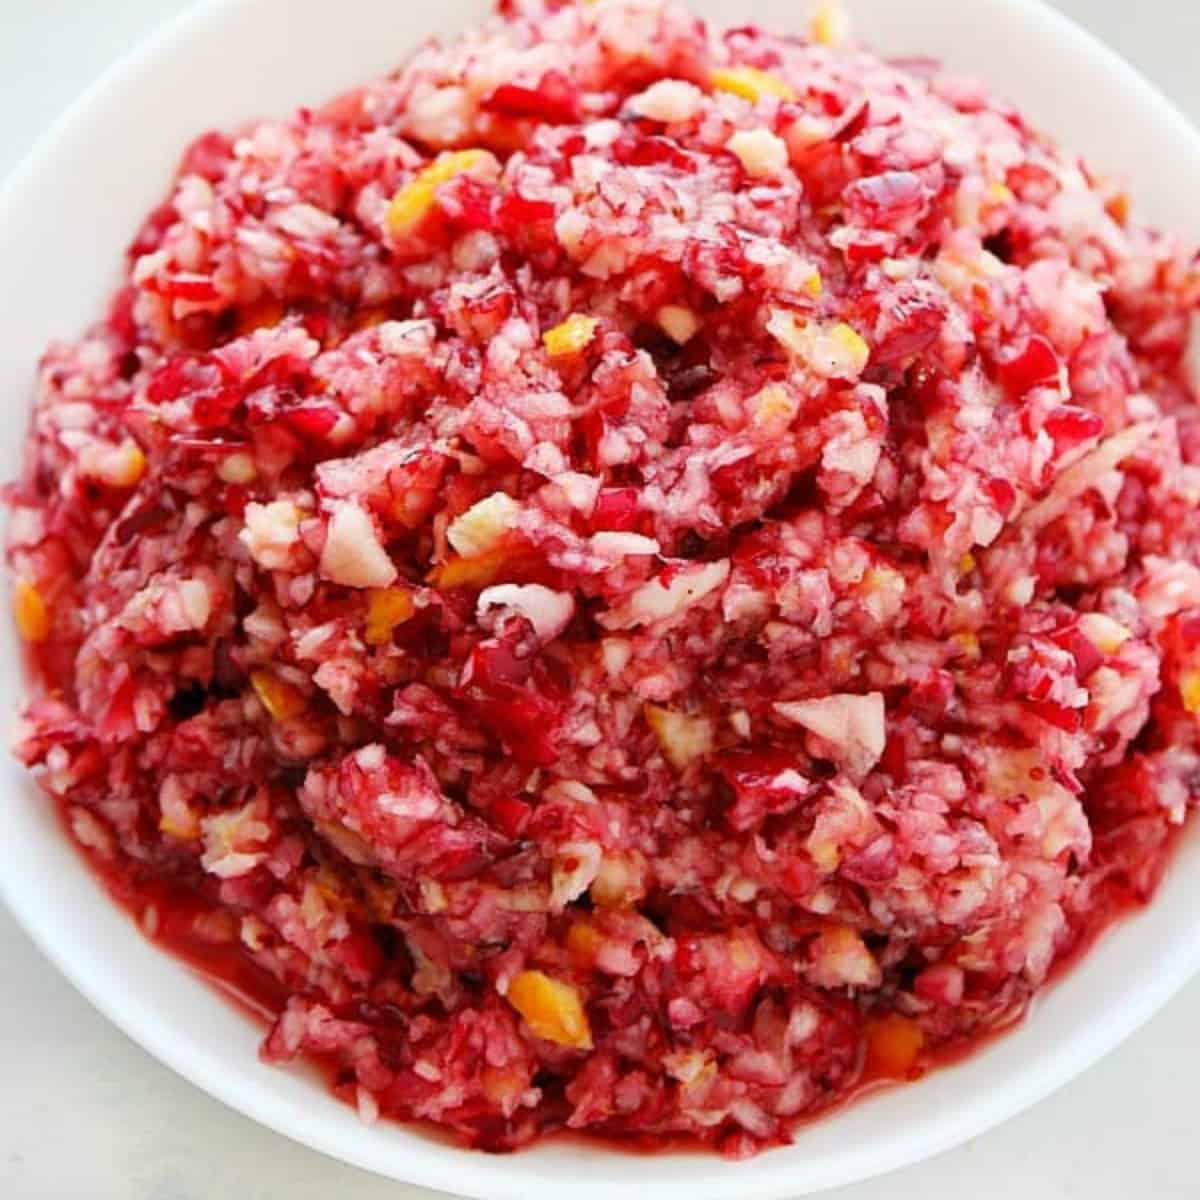 Cranberry relish in a white serving bowl.